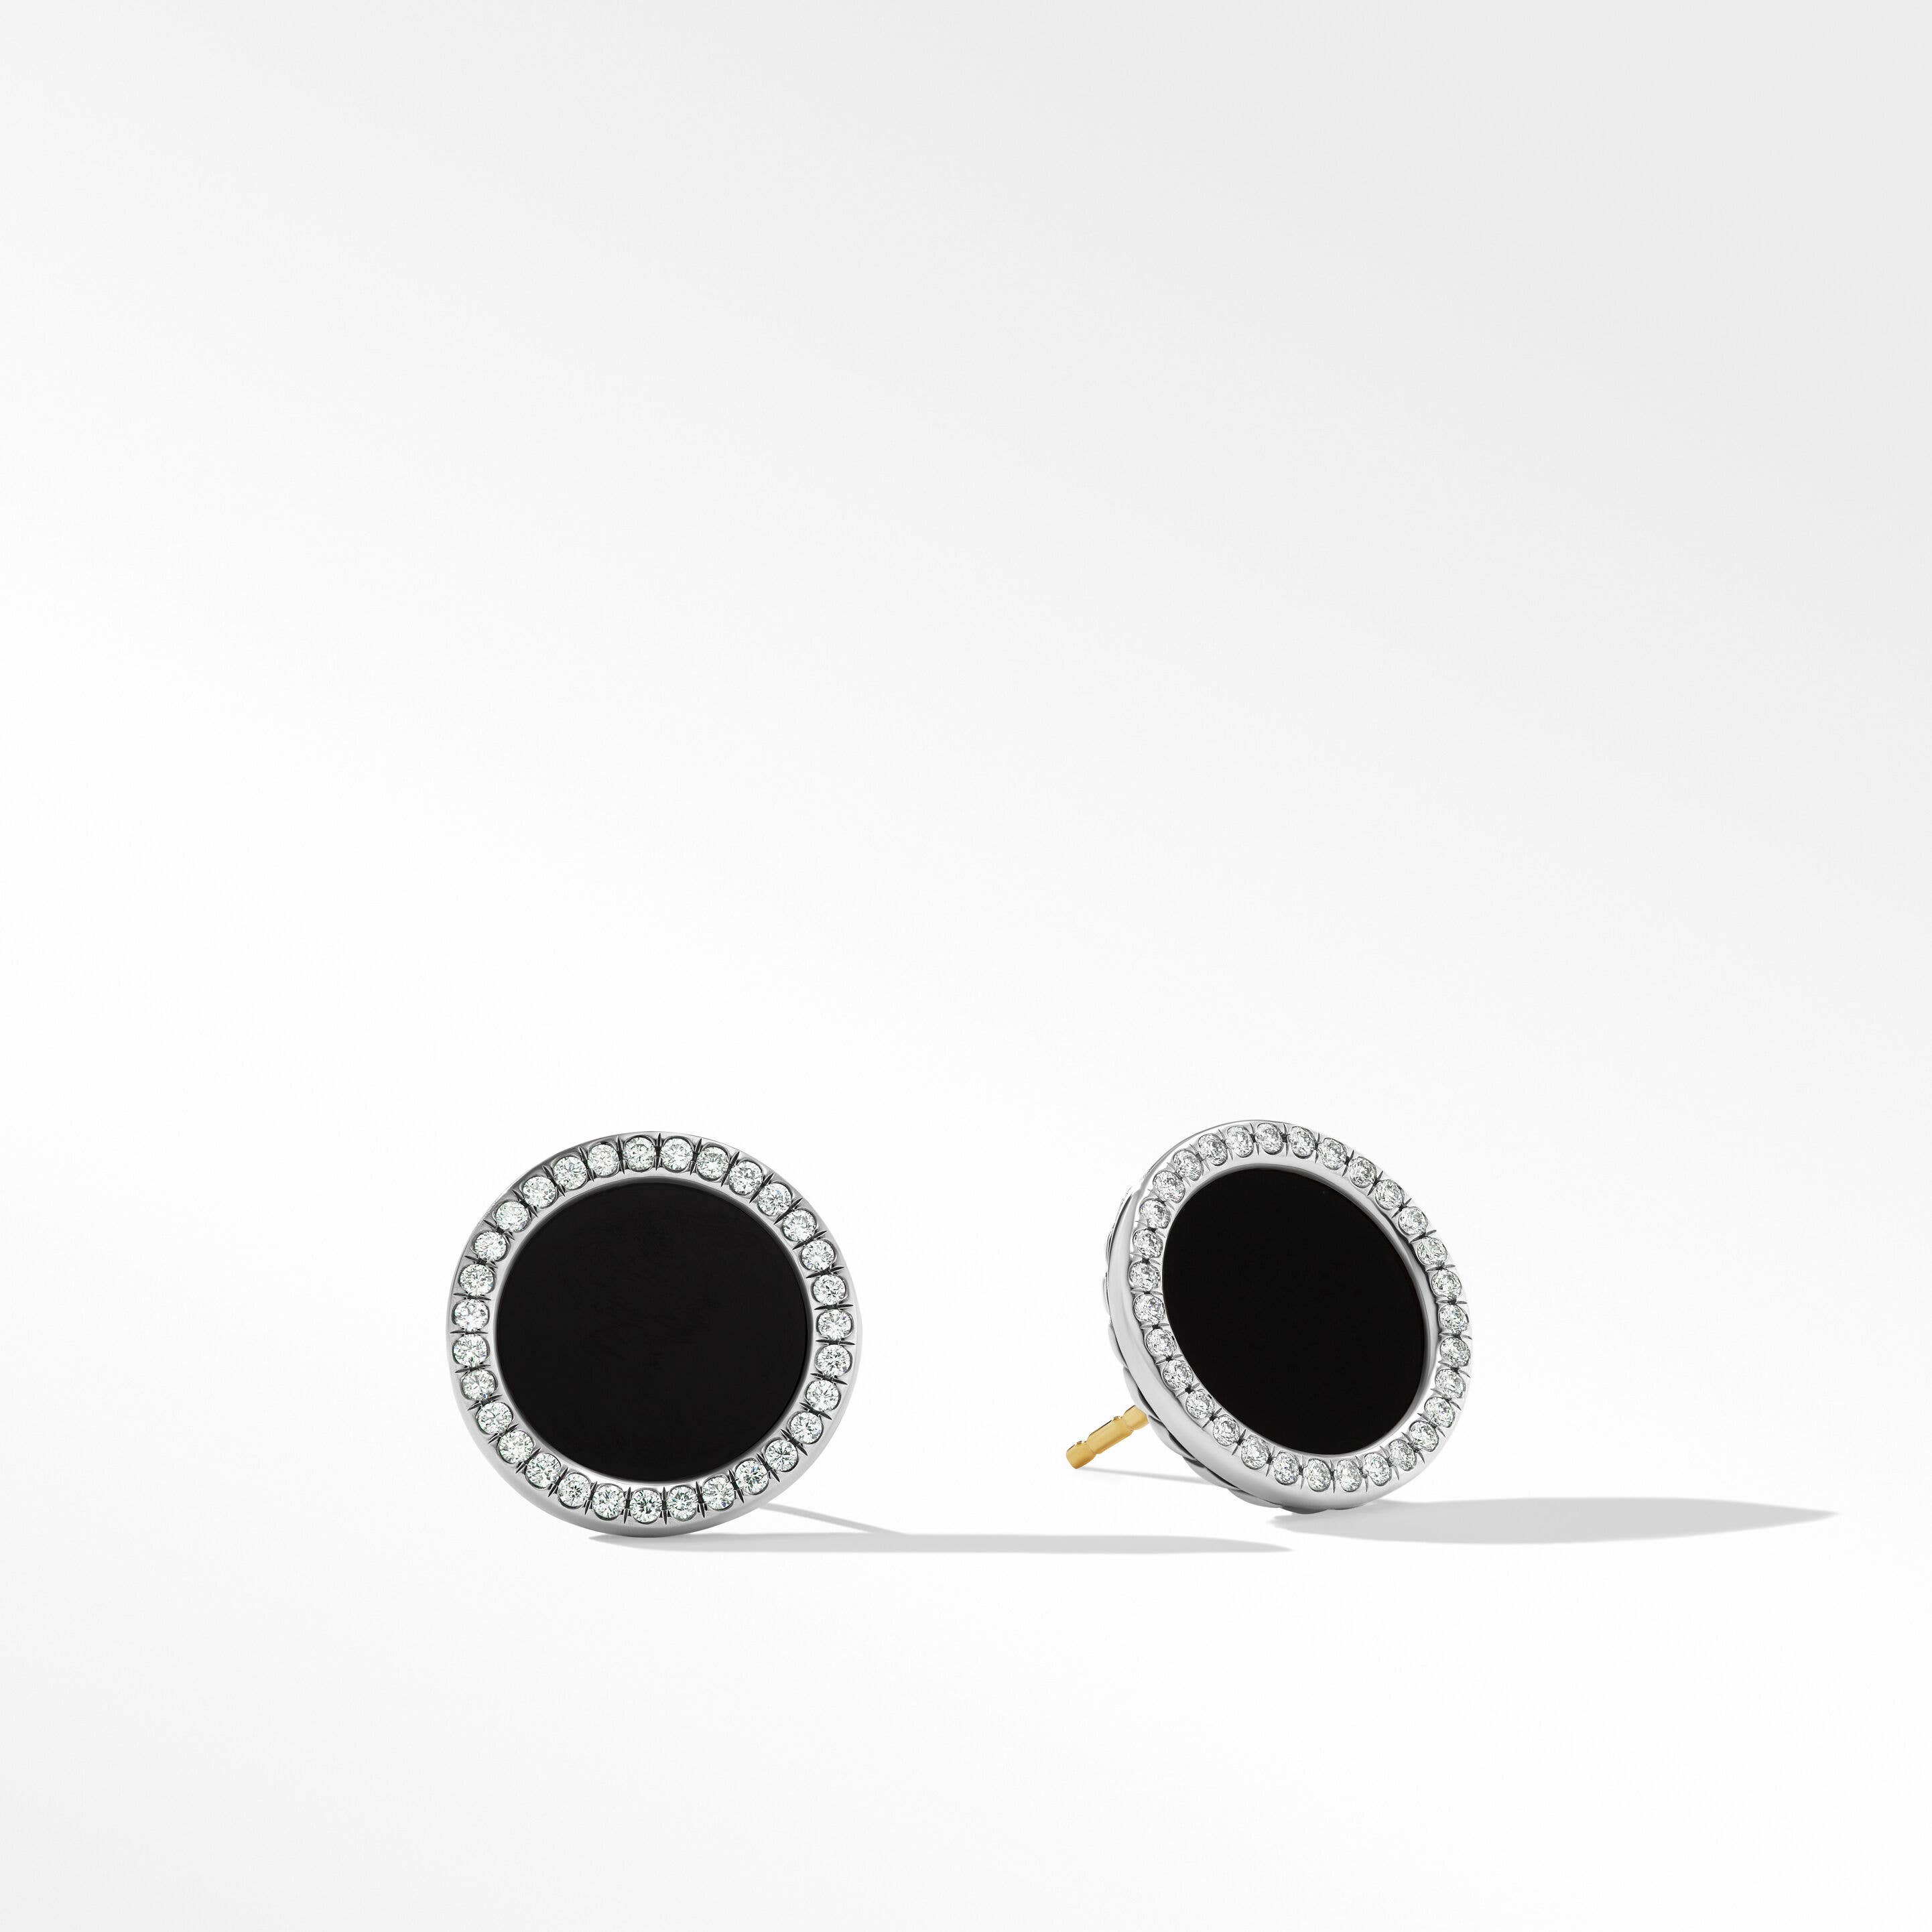 DY Elements® Stud Earrings in Sterling Silver with Black Onyx and Pavé Diamonds